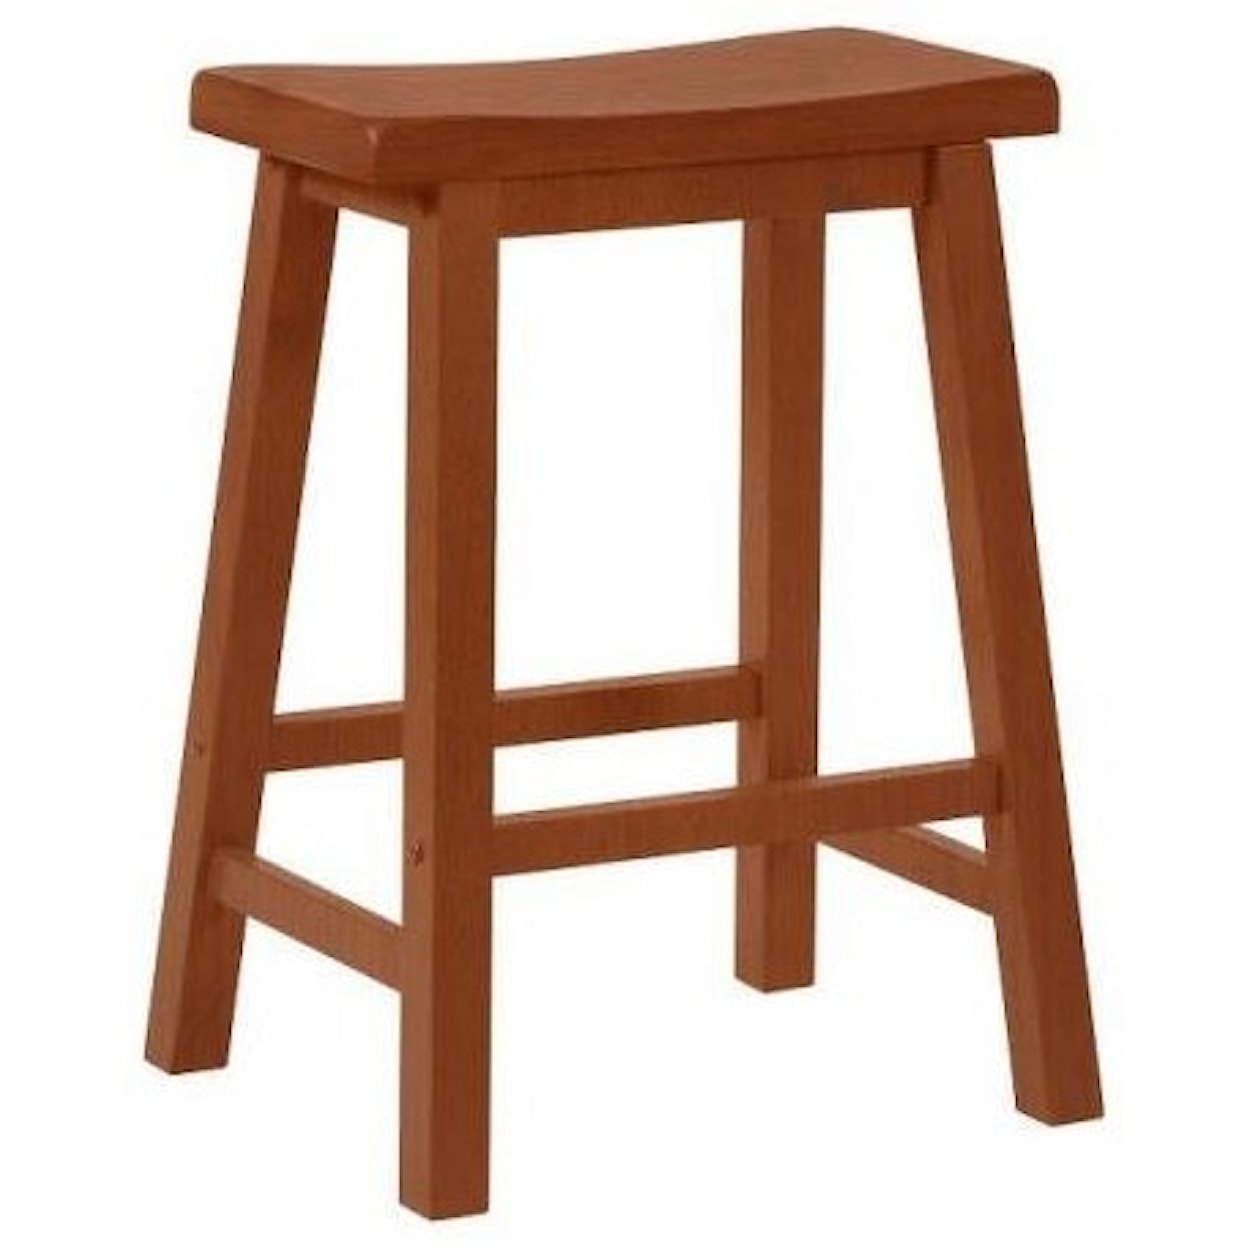 Powell Accent Furniture Counter Stool